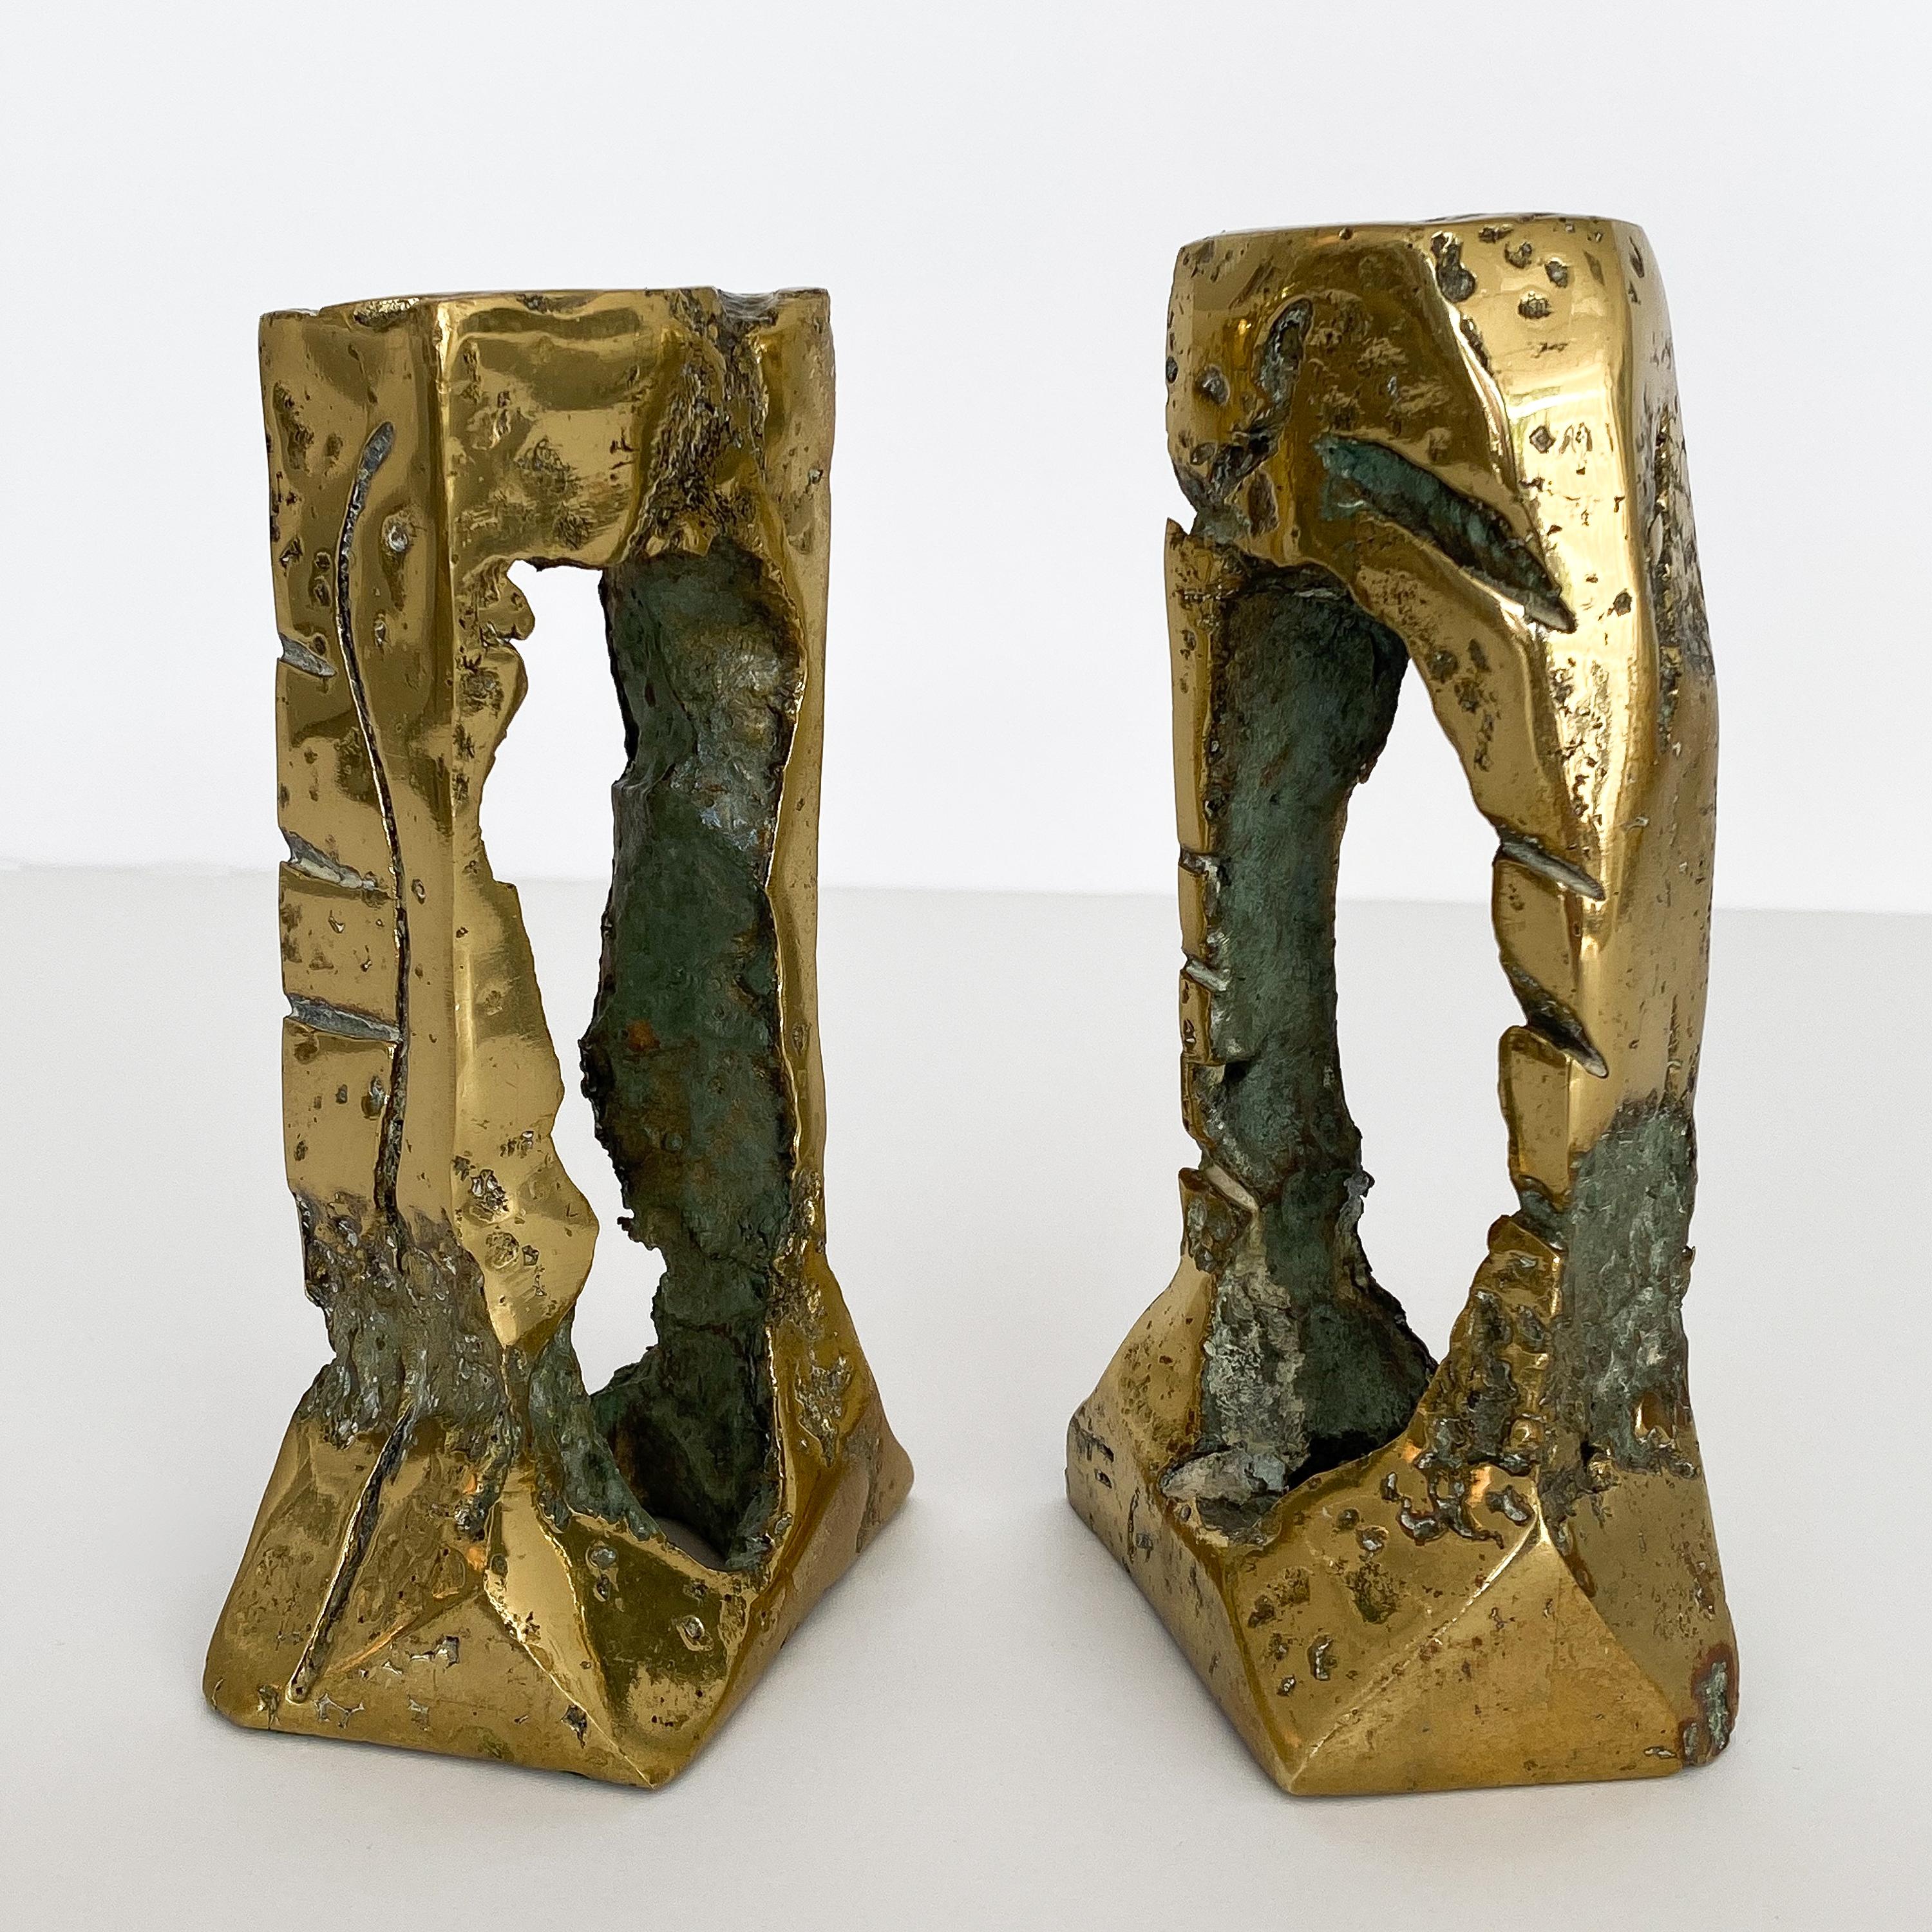 Patinated Pair of Brutalist Bronze Candlesticks by Hugo Rodriguez